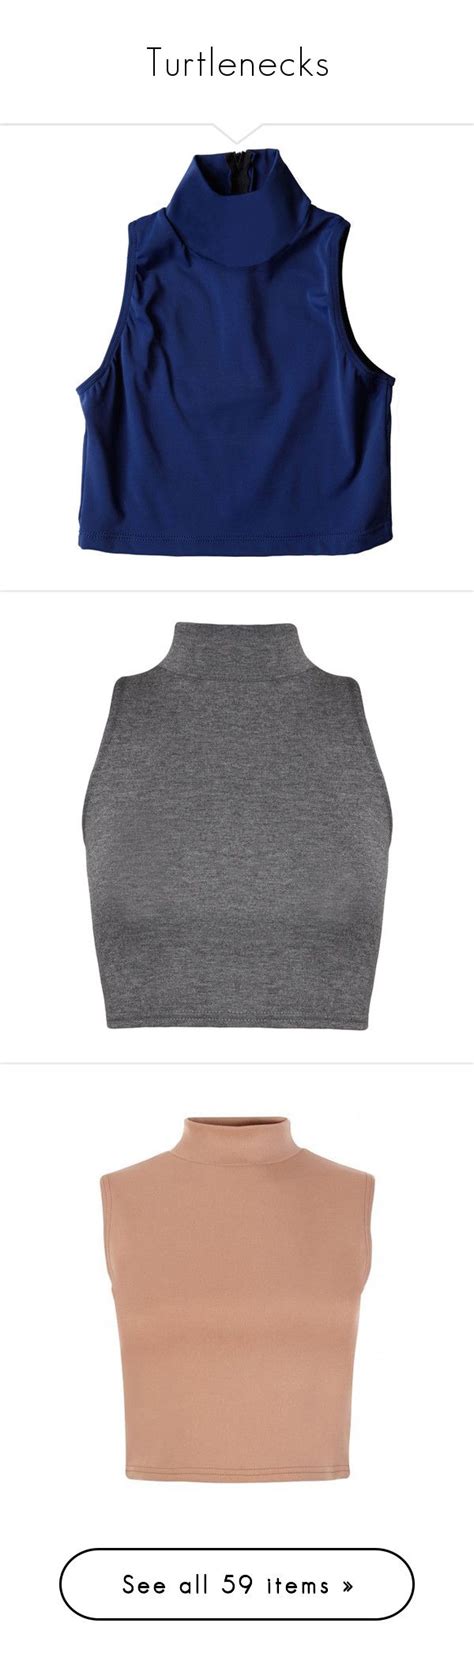 Turtlenecks By Jmn312 Liked On Polyvore Featuring Tops Crop Tops